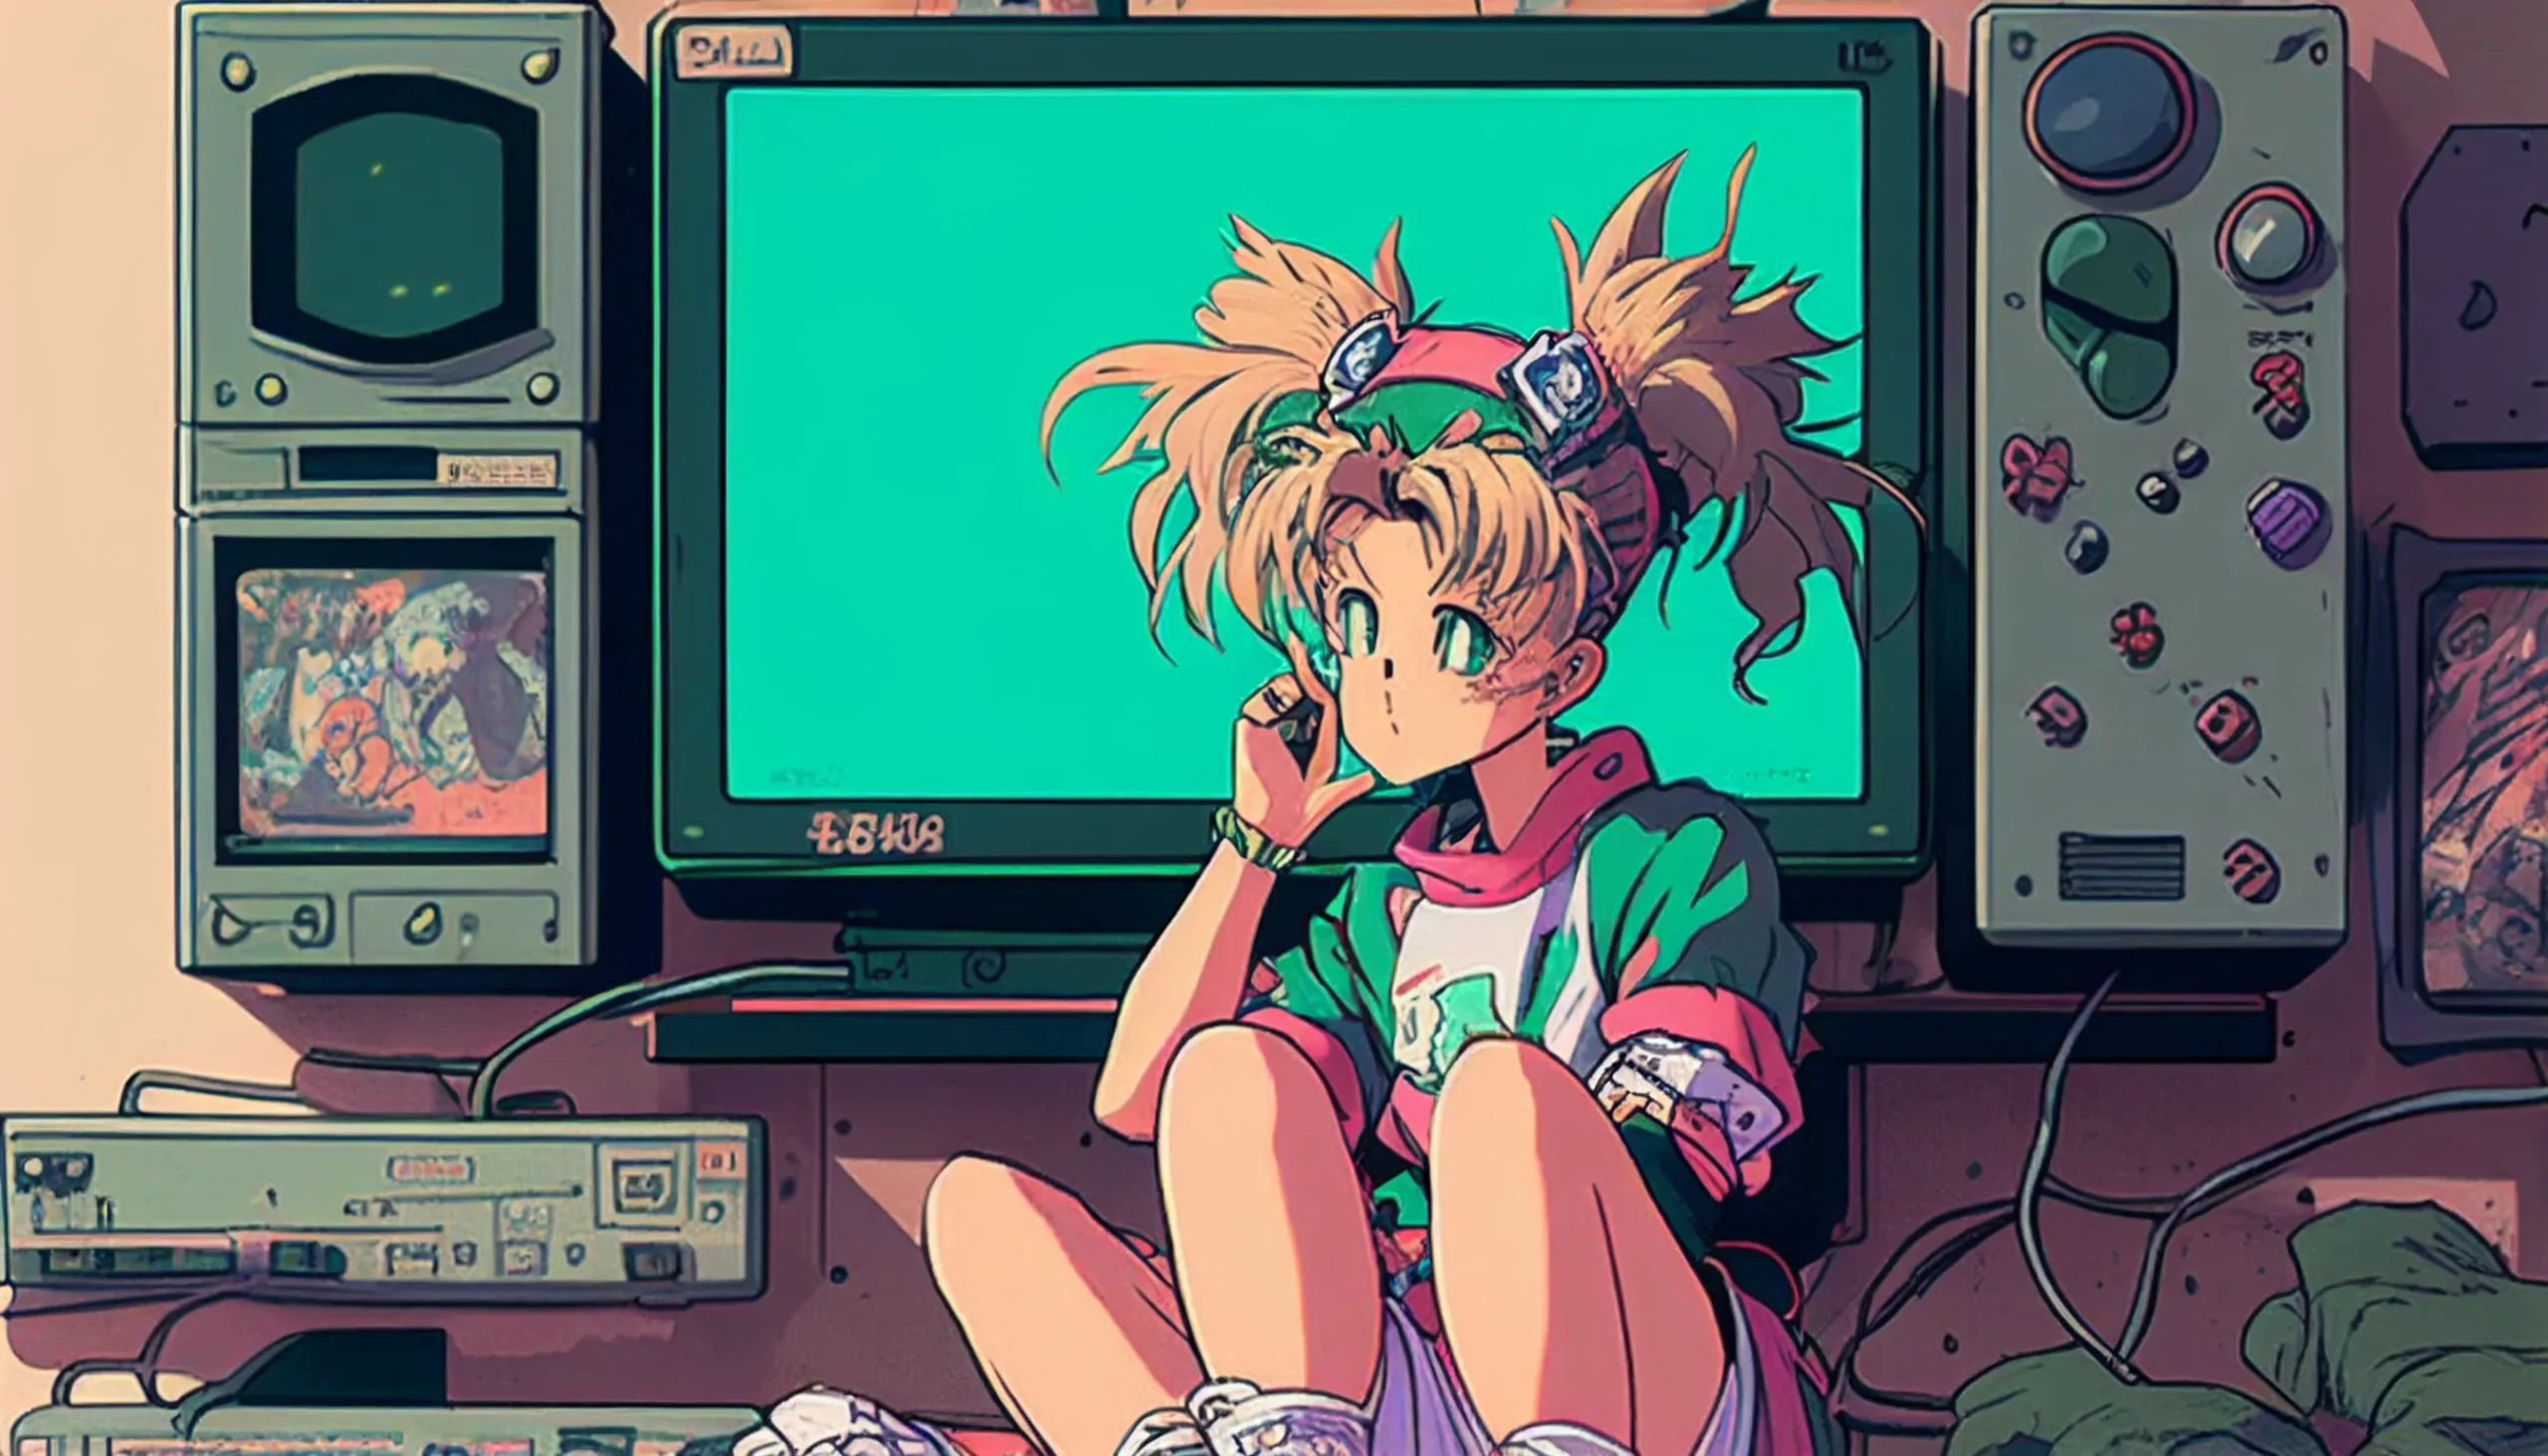 A girl sitting in front of a TV, with two pigtails and a green shirt. - Anime